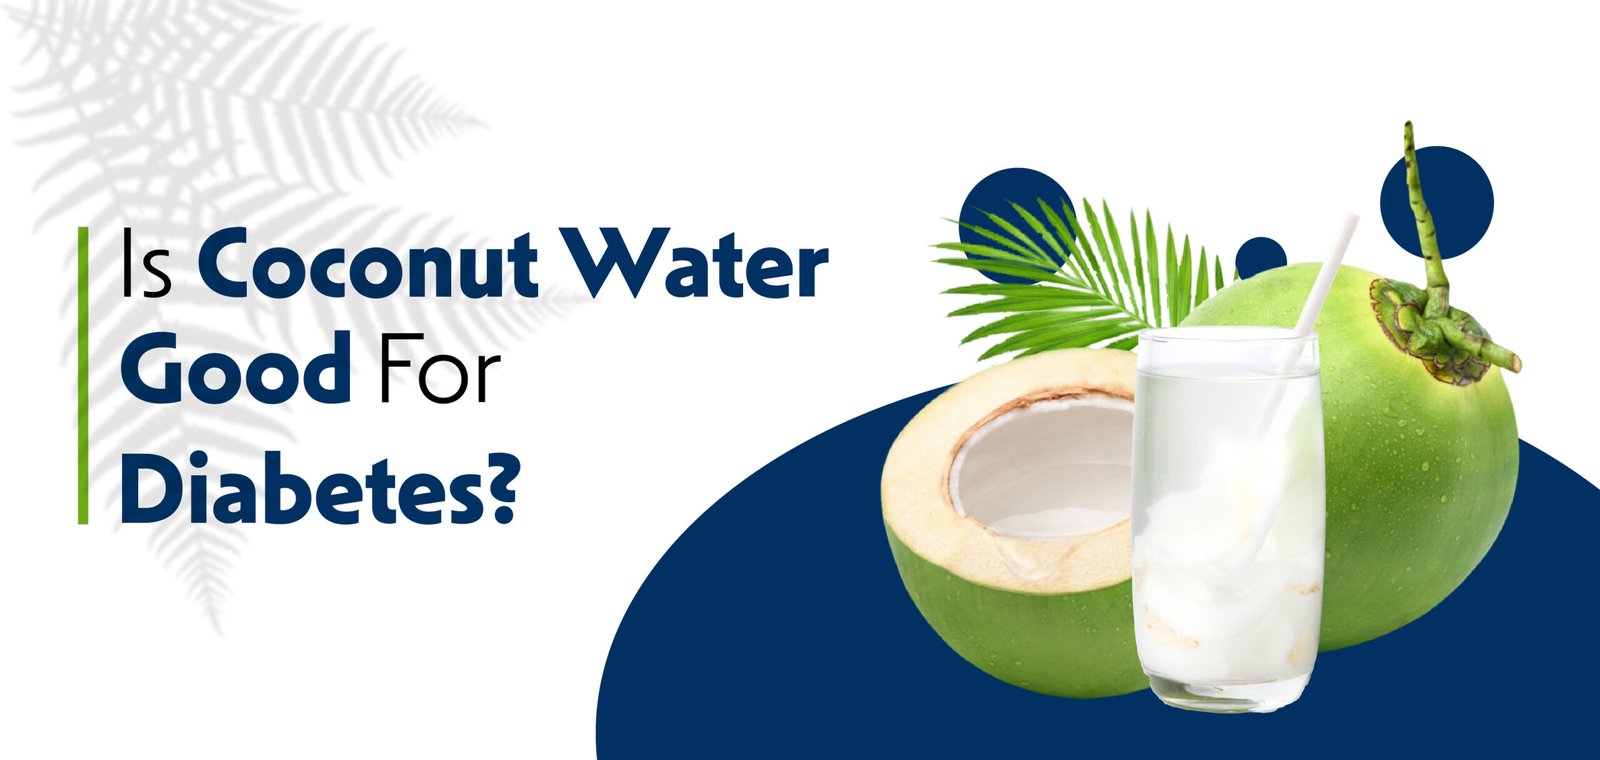 Is Coconut Water good for Diabetes